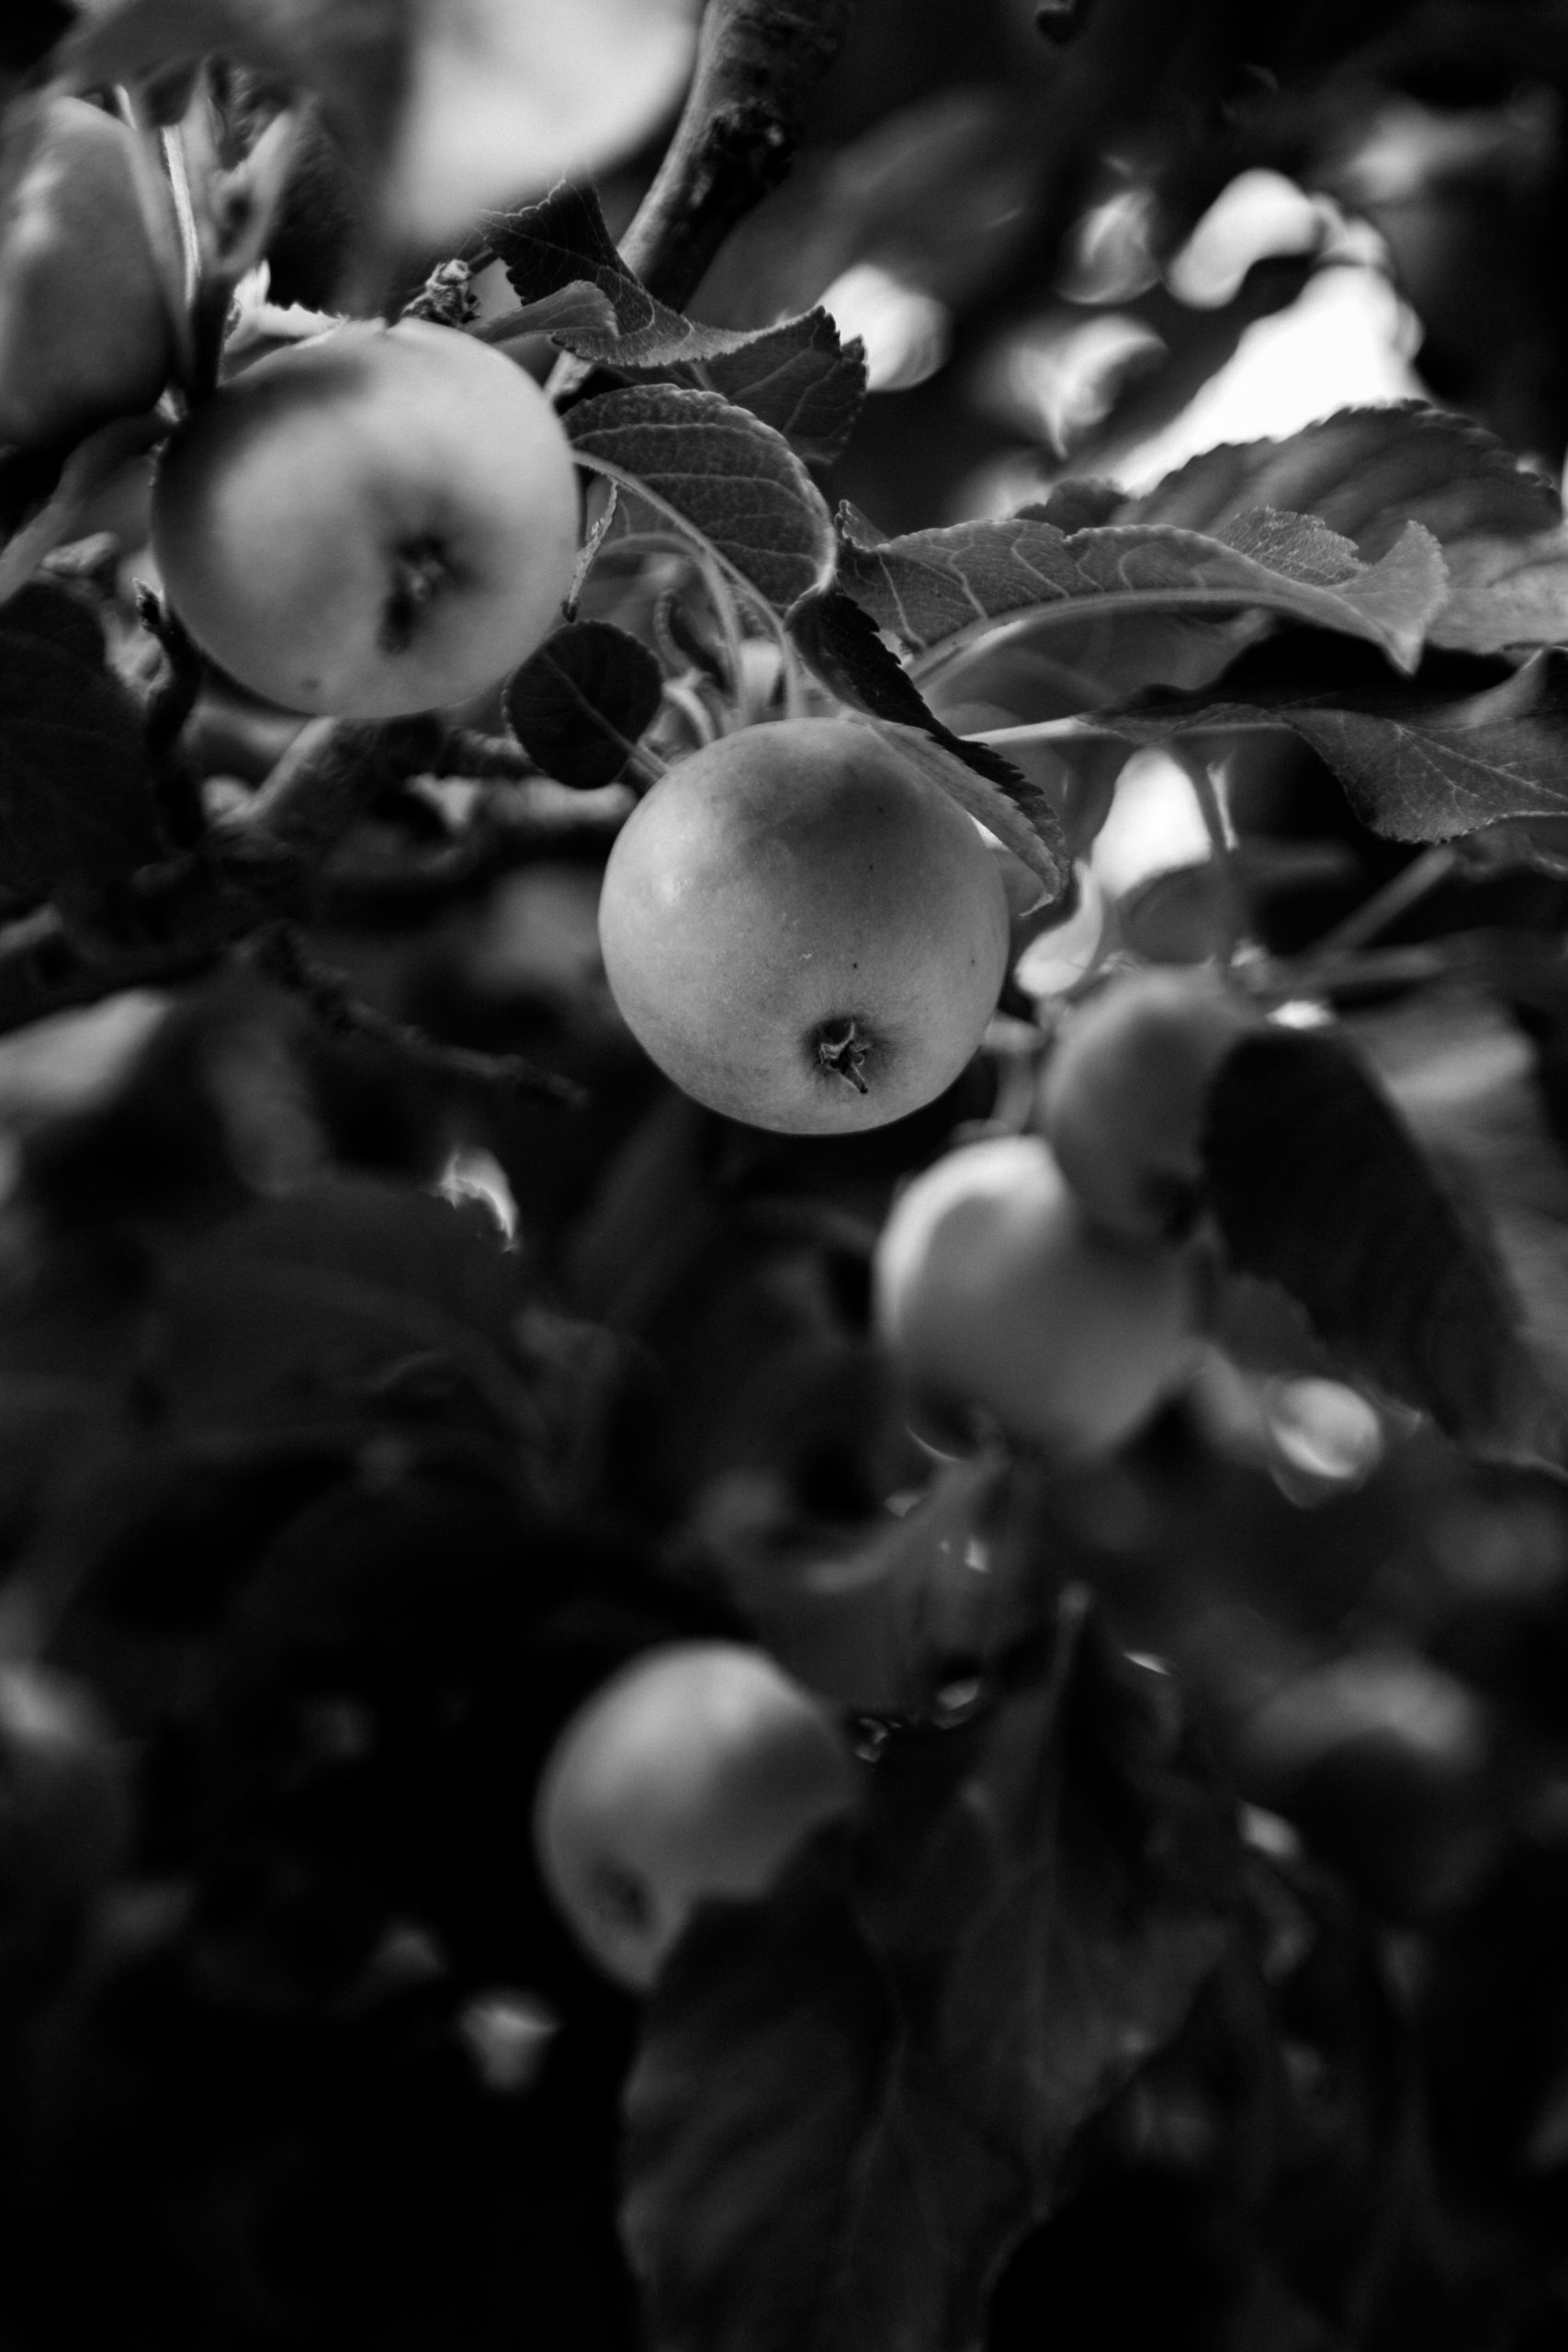 Black and white image of a cluster of apples in a tree